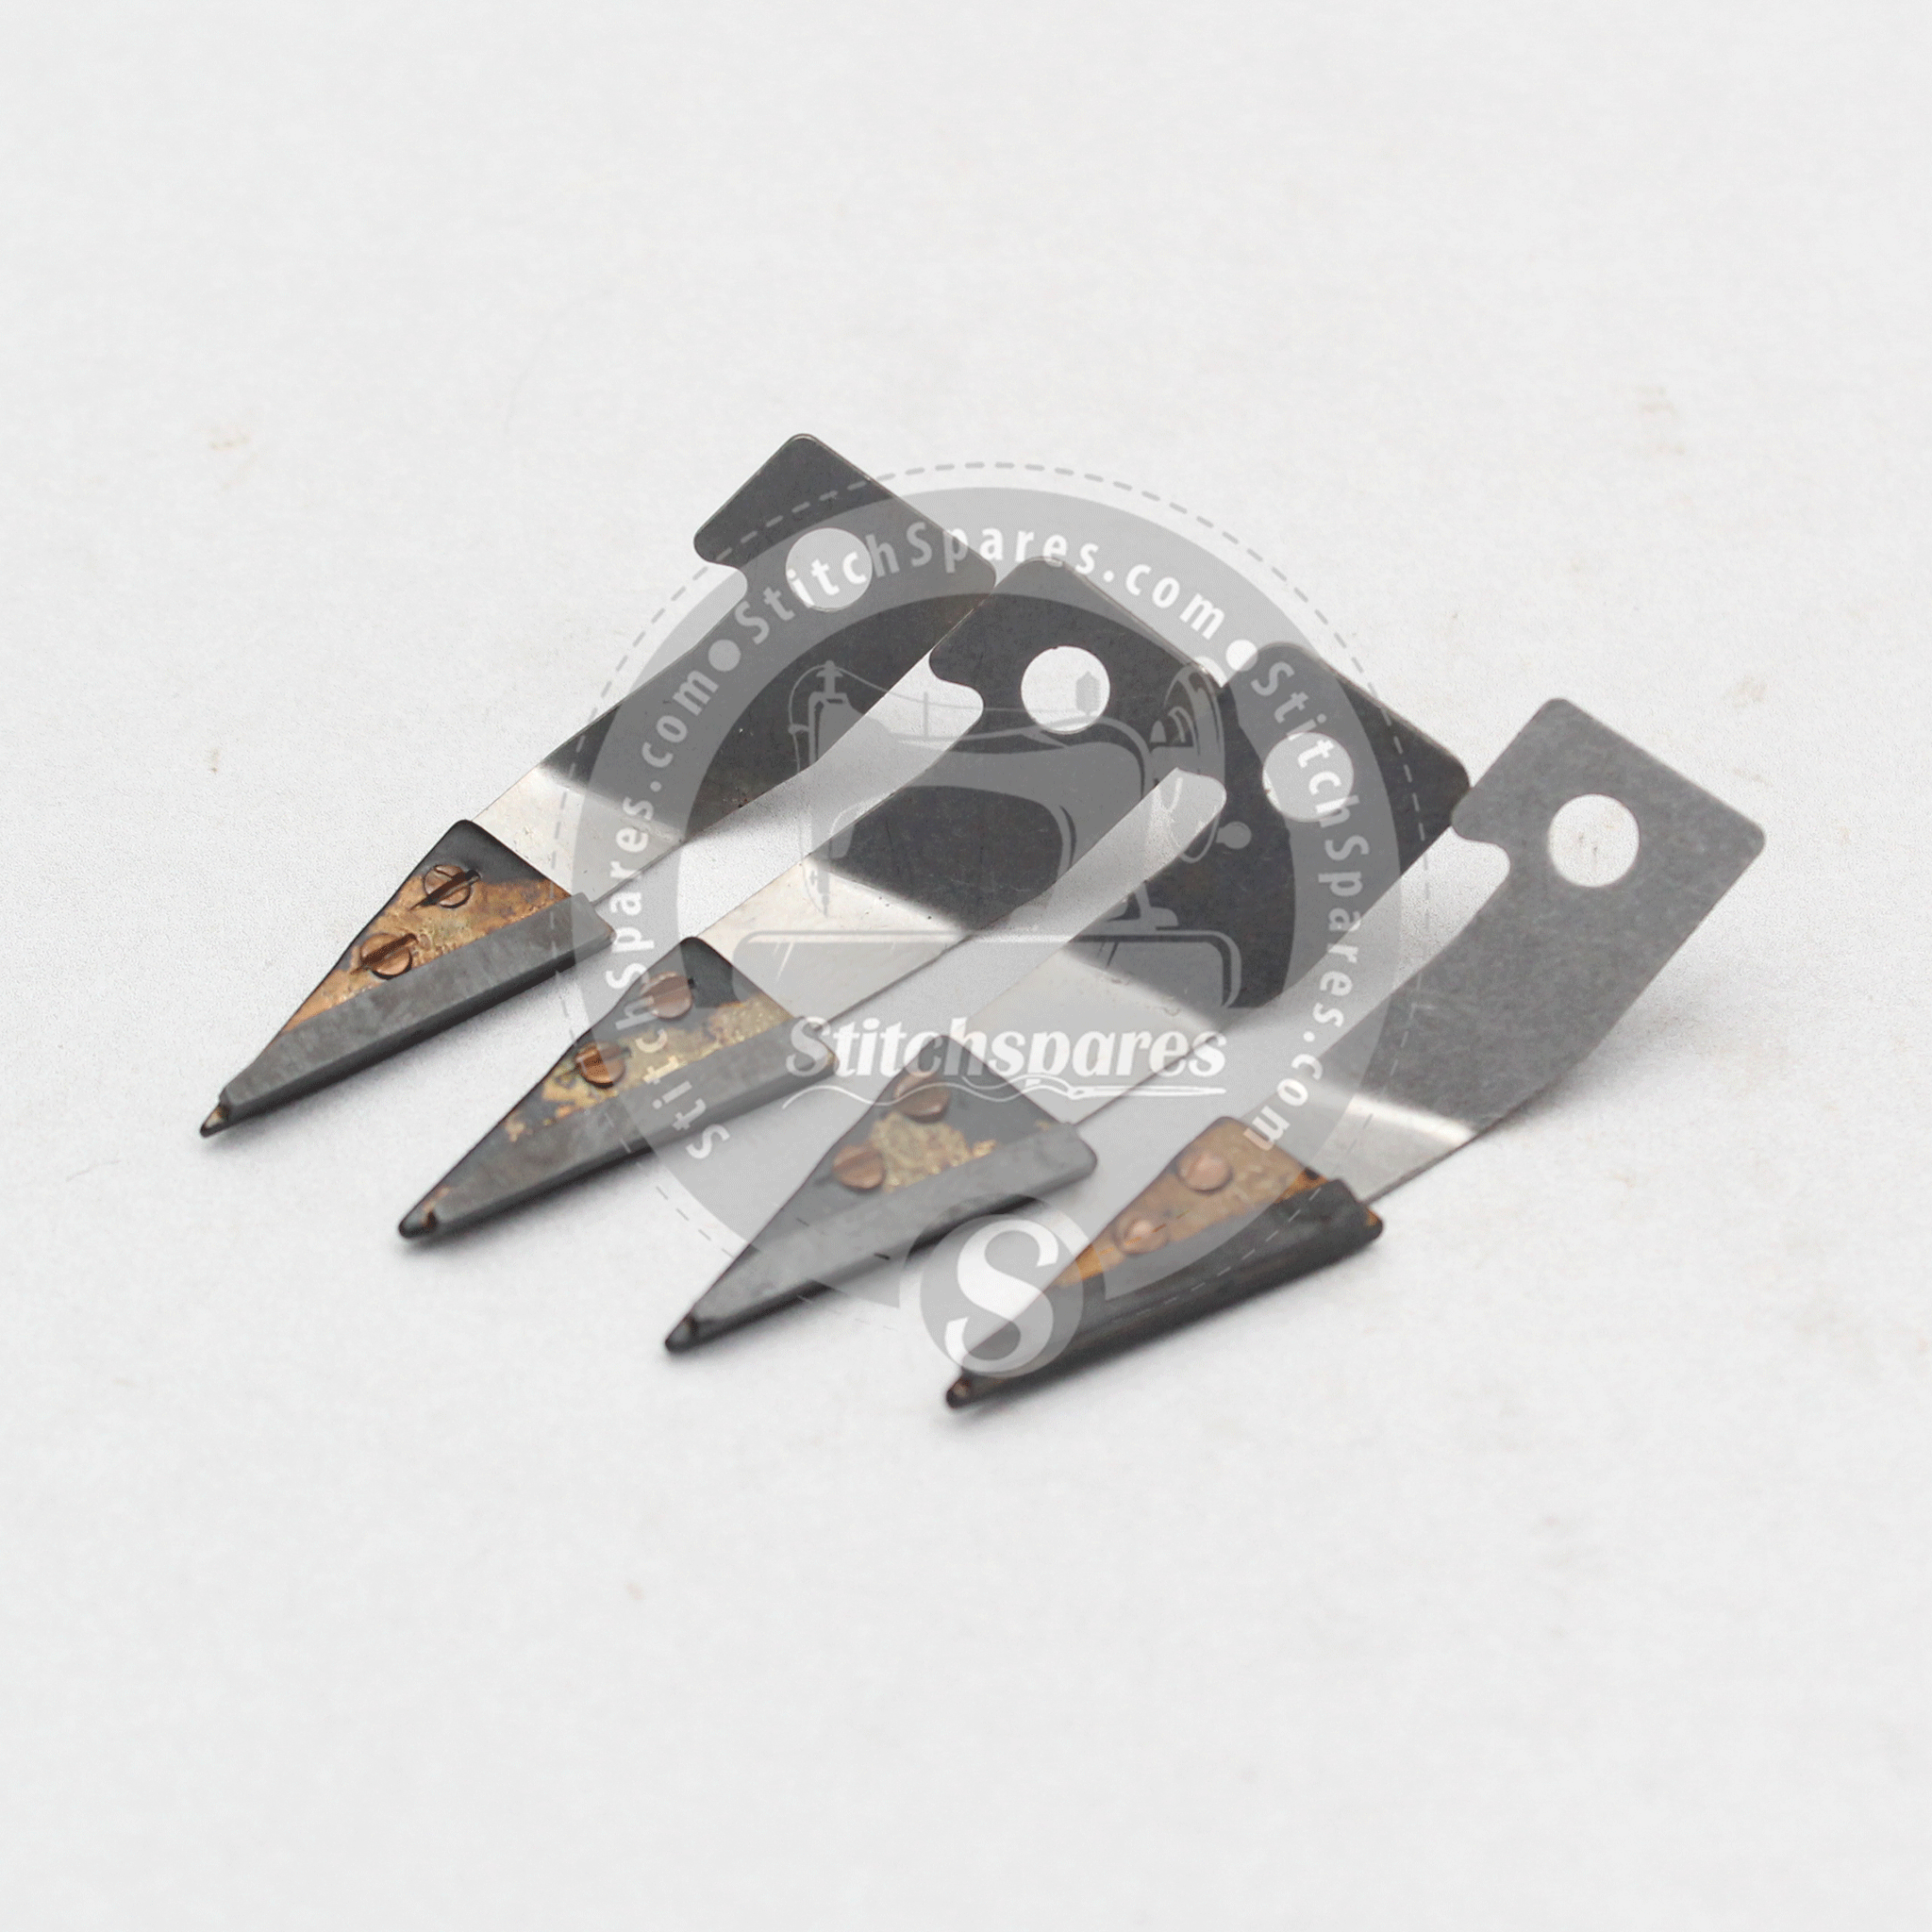 Lower Knife For YJ-65 (LEJIANG ORIGINAL) Cloth Cutting Machine Spare Part  Part no : G41